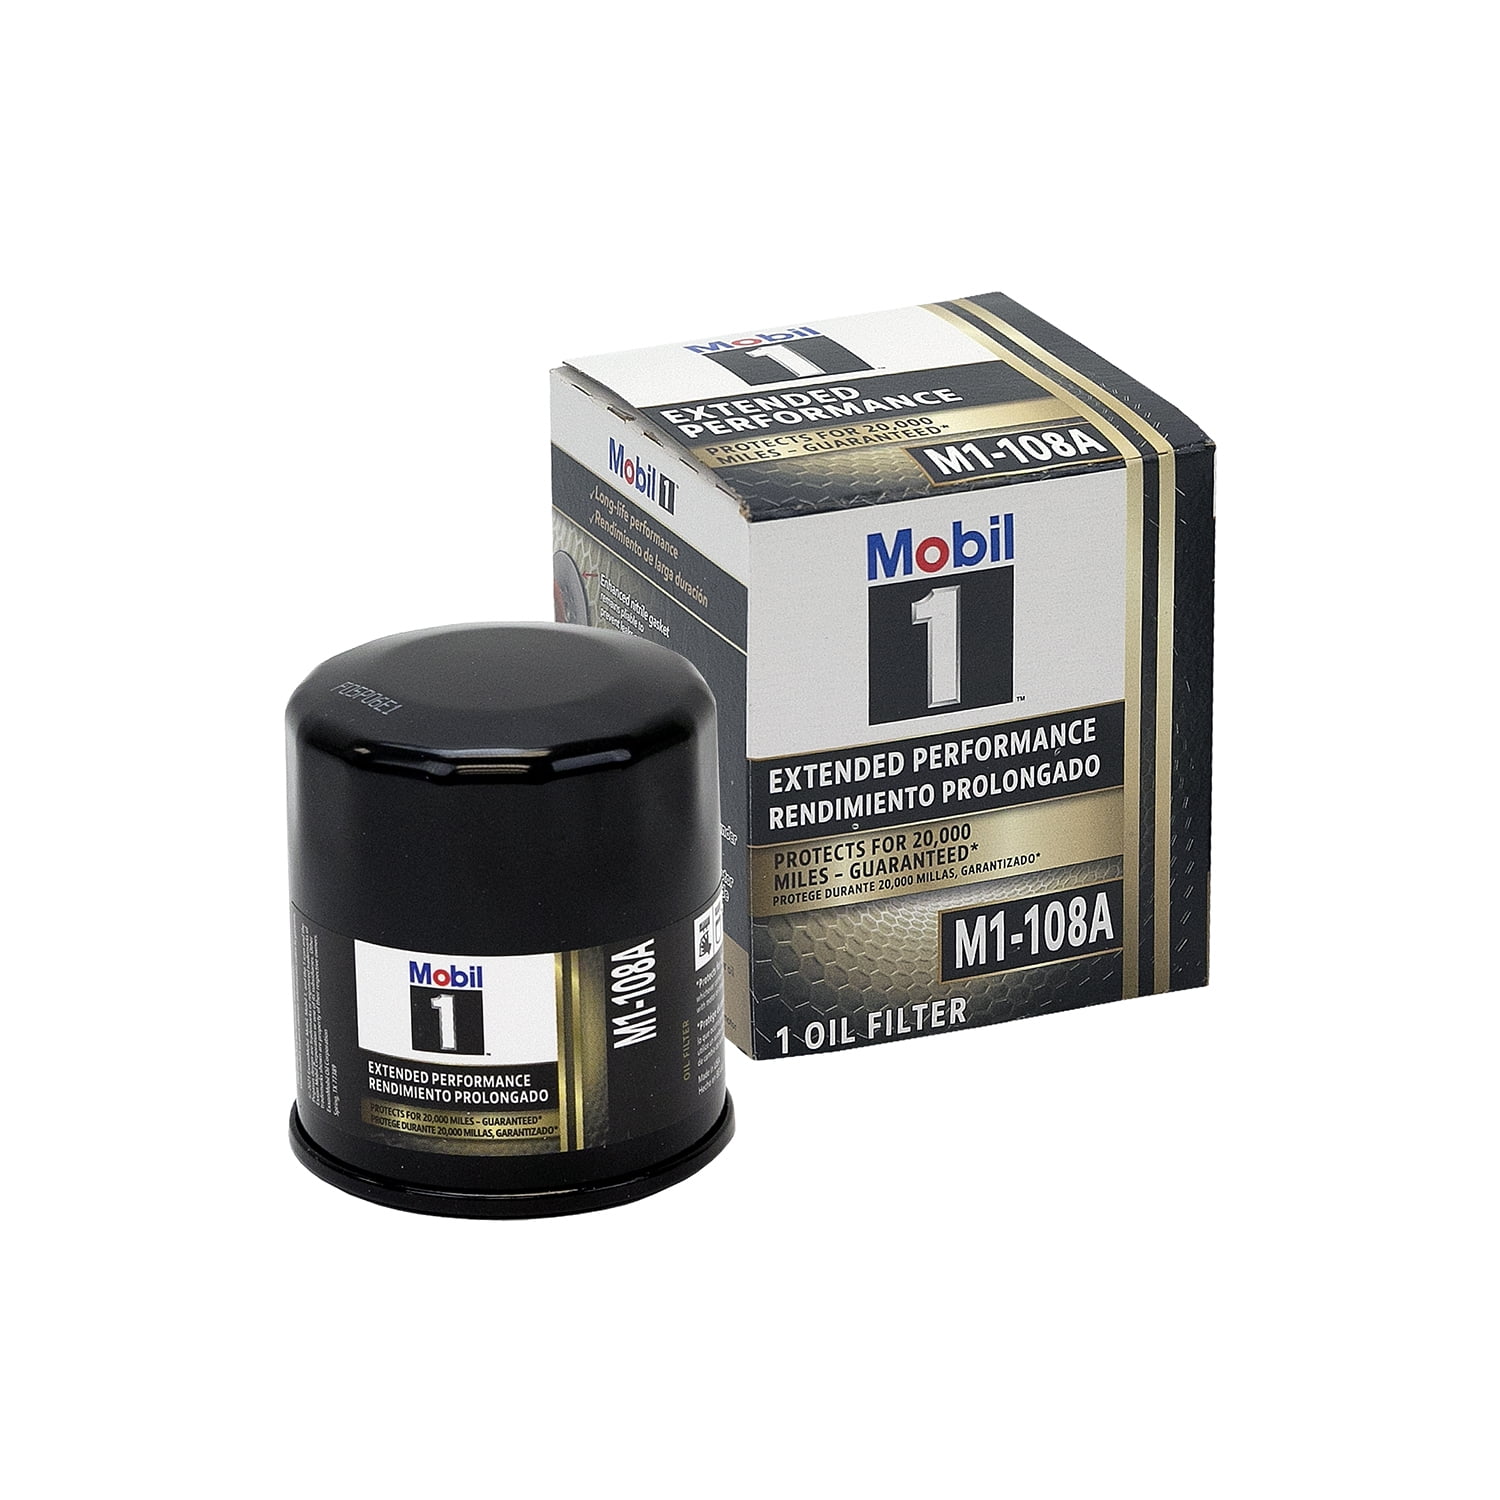 buy-mobil-1-extended-performance-m1-108a-oil-filter-online-at-lowest